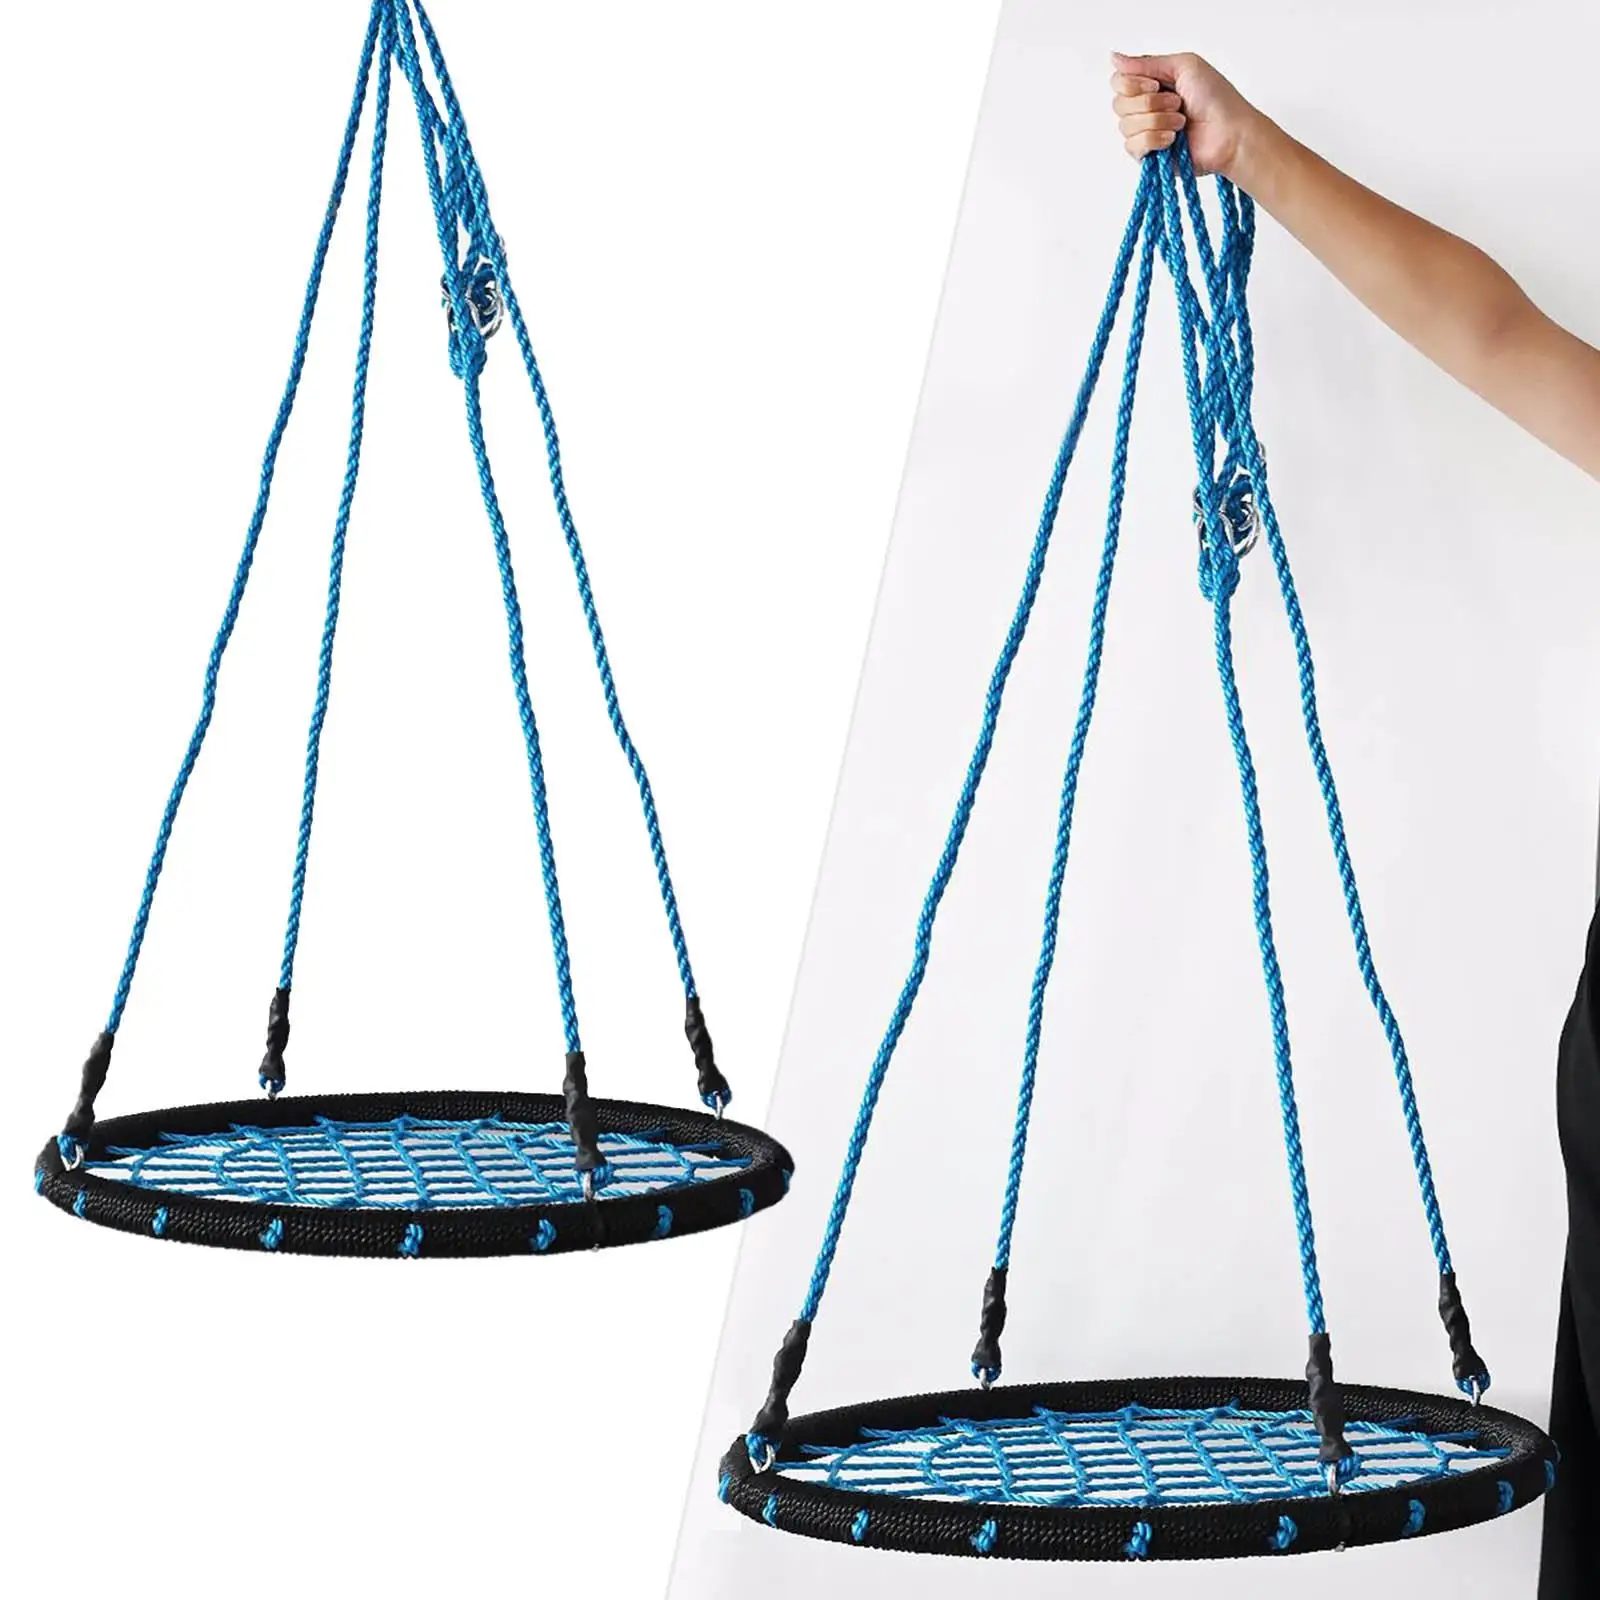  Rope Adjustable Max 150kg Hanging Playground Accessory Round for Balcony Outdoor Indoor Bedroom Adults Gifts